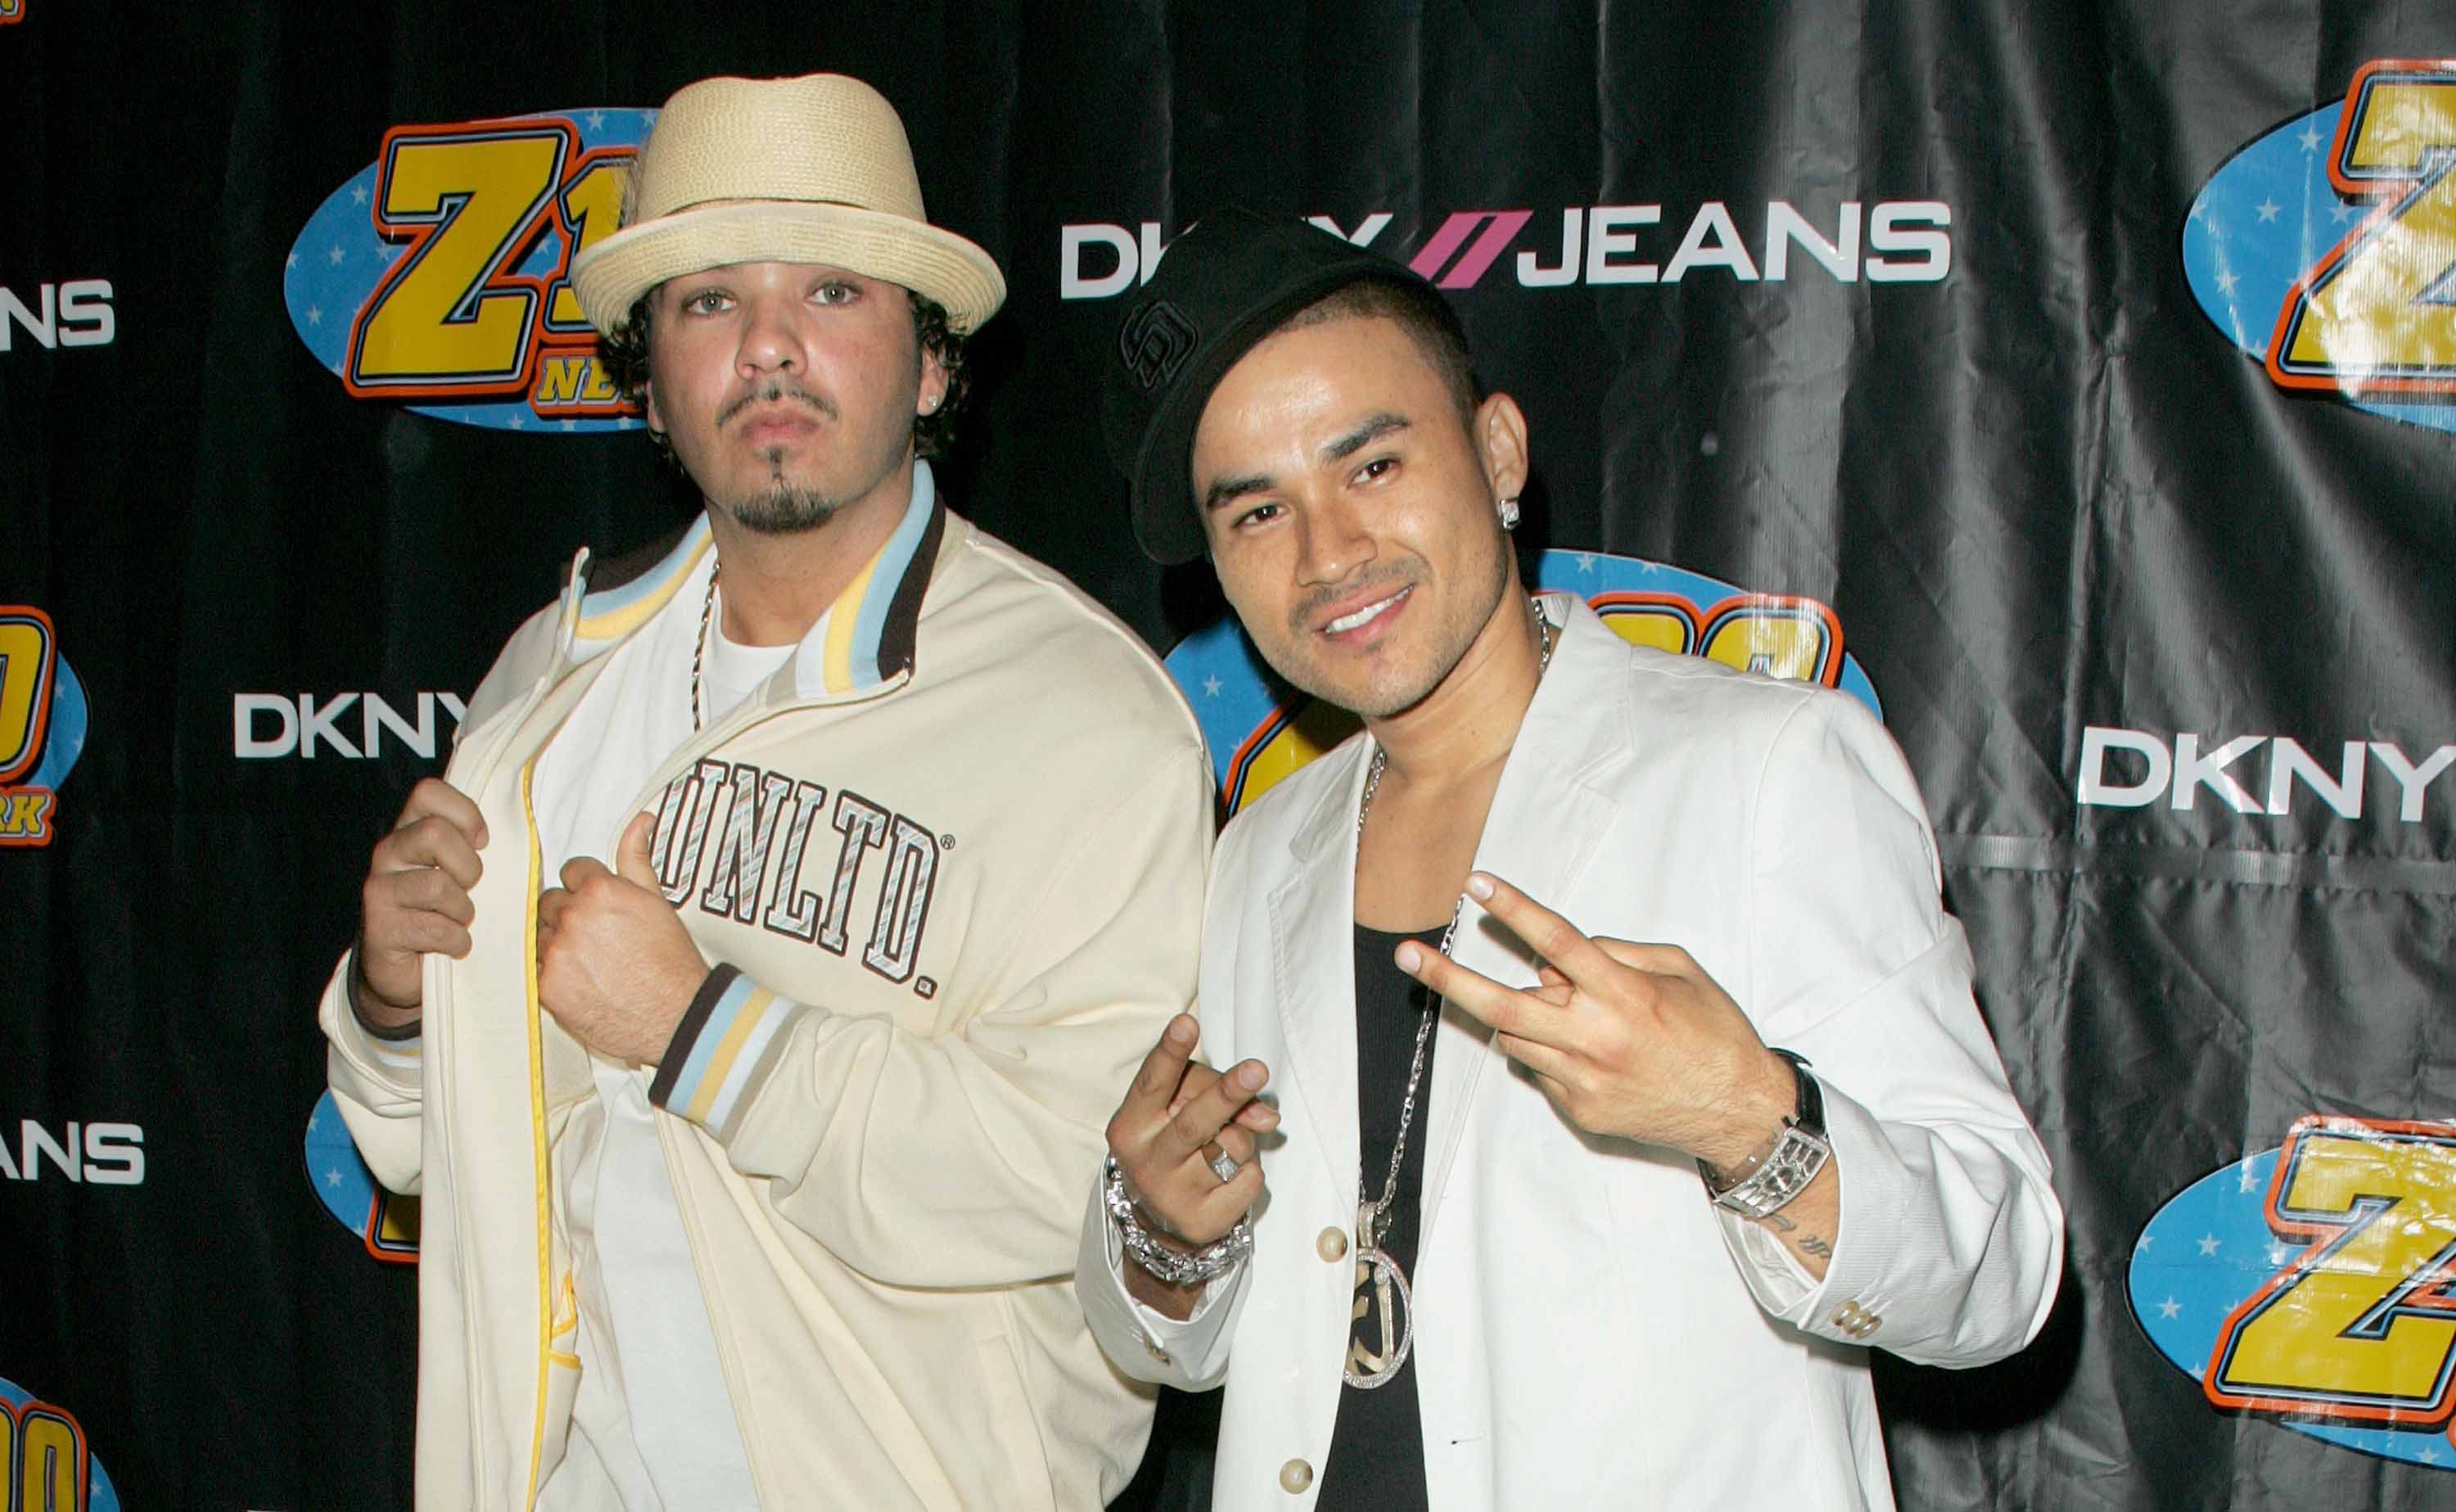 Baby Bash Wallpapers